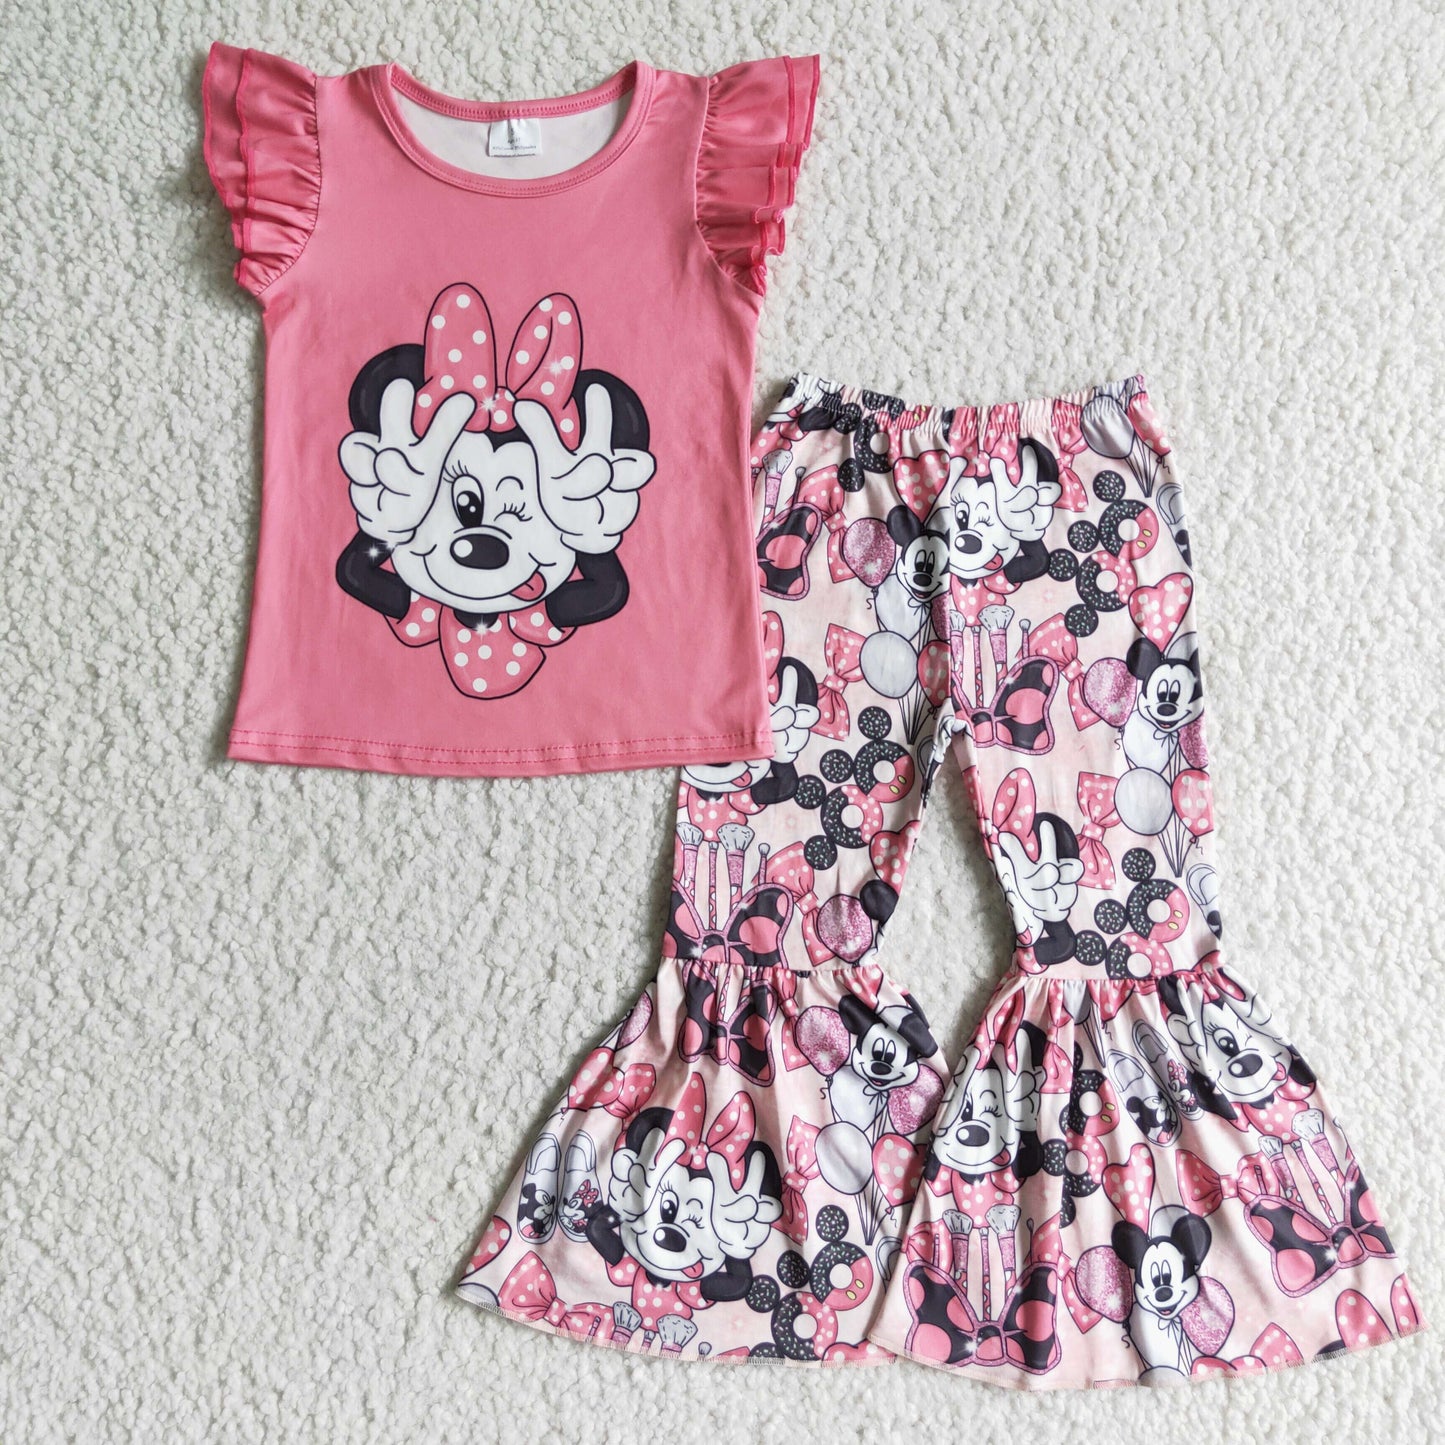 GSPO0092 Baby Girl Cartoon Pants Outfit